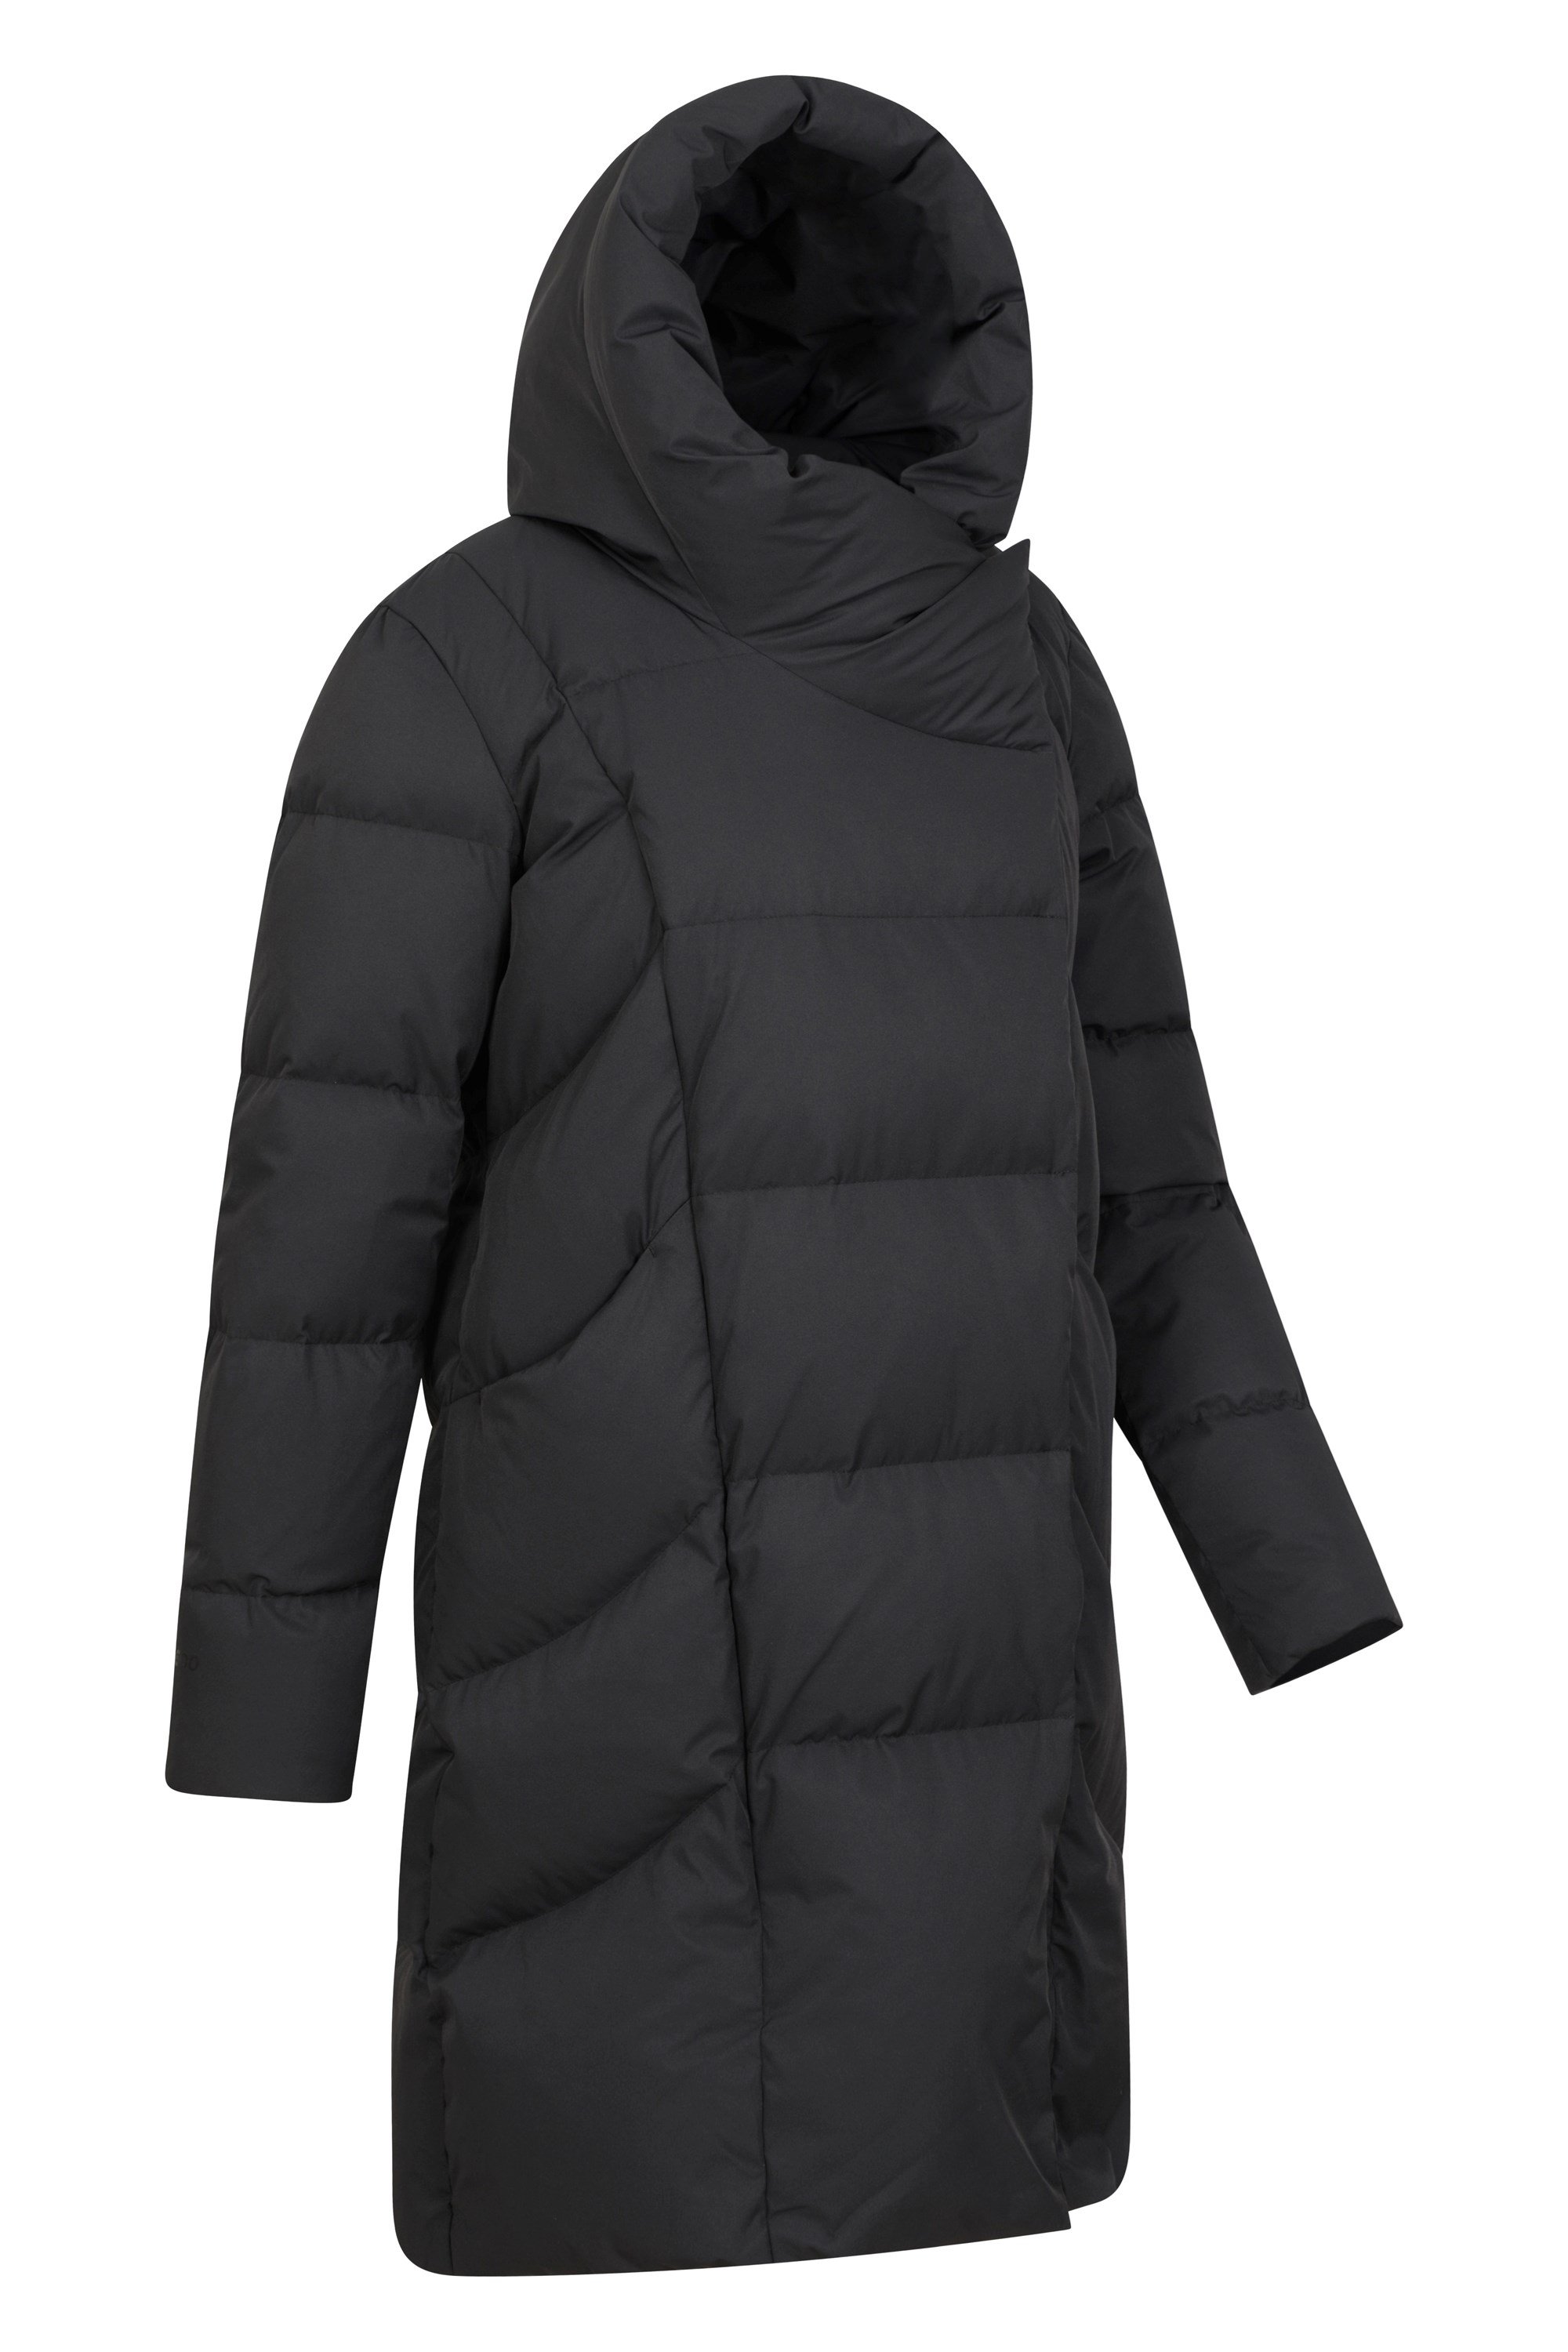 easily Presenter Reliable Women's Padded Jackets & Coats | Mountain Warehouse GB